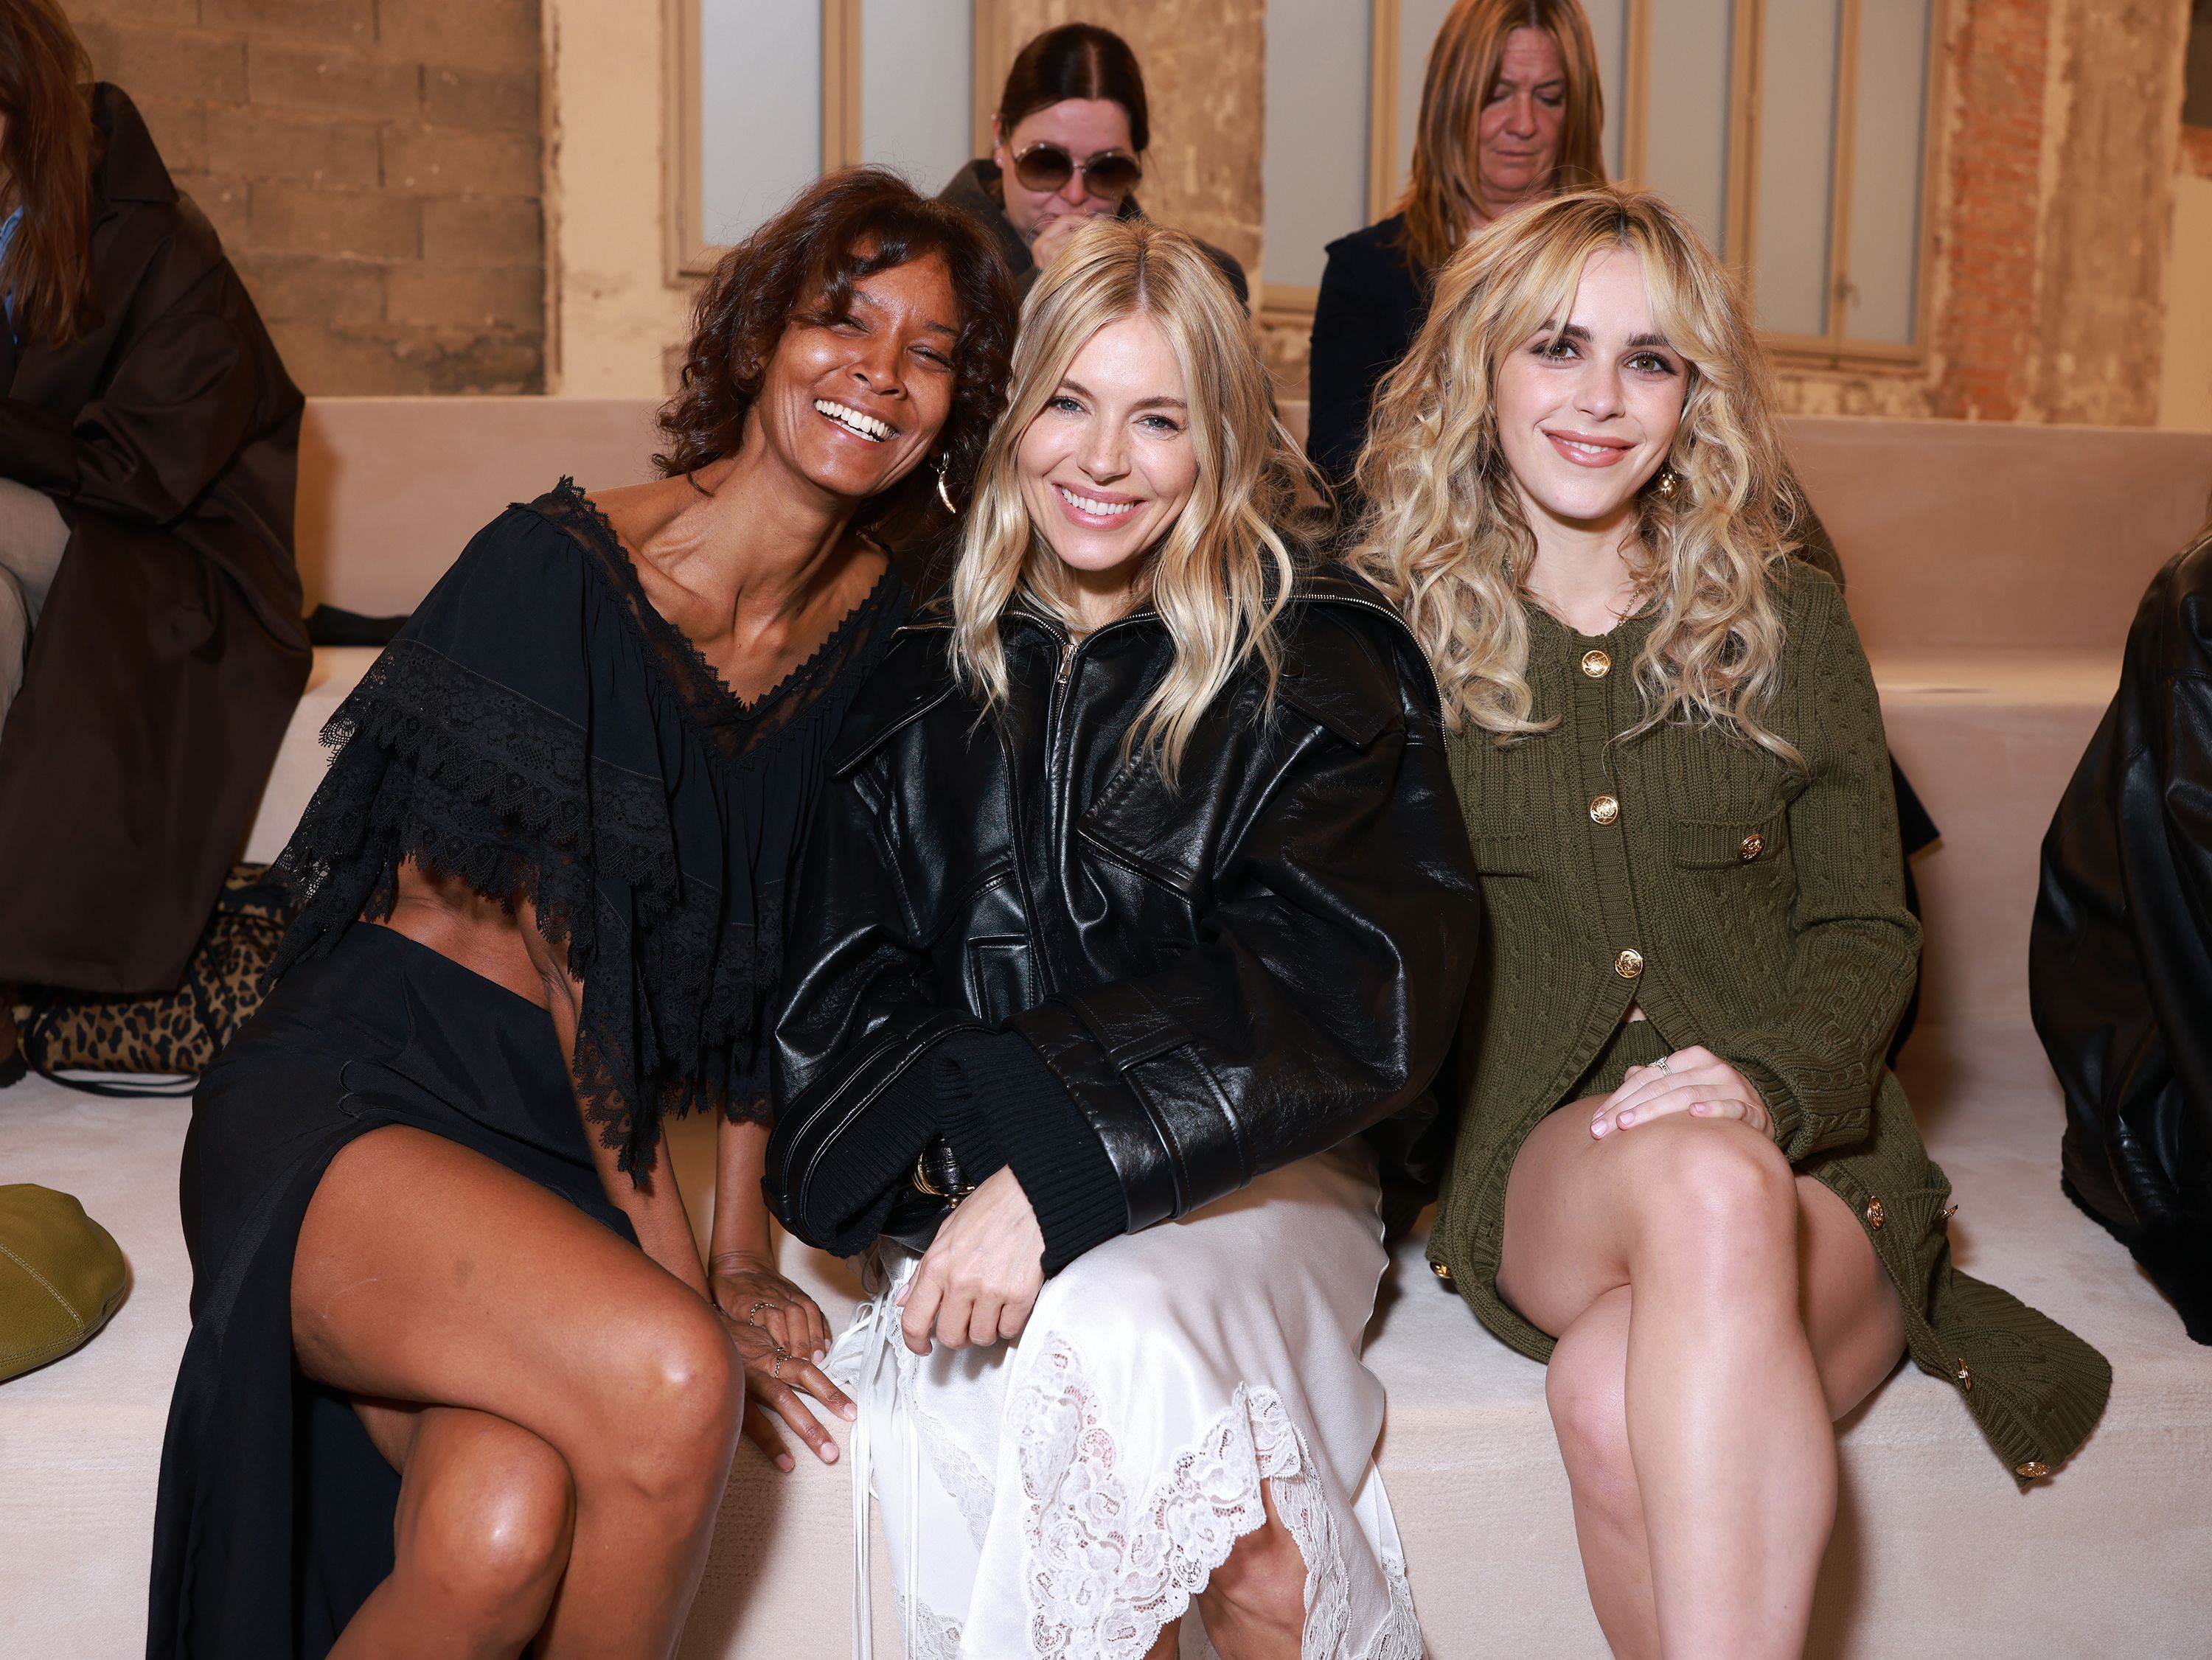 Actor Sienna Miller was front row at Chloe — alongside model Liya Kebede (on left) and actor Kiernan Shipka (on right)— to witness Chemena Kamali's debut at the house, and the return of Miller's once-signature 